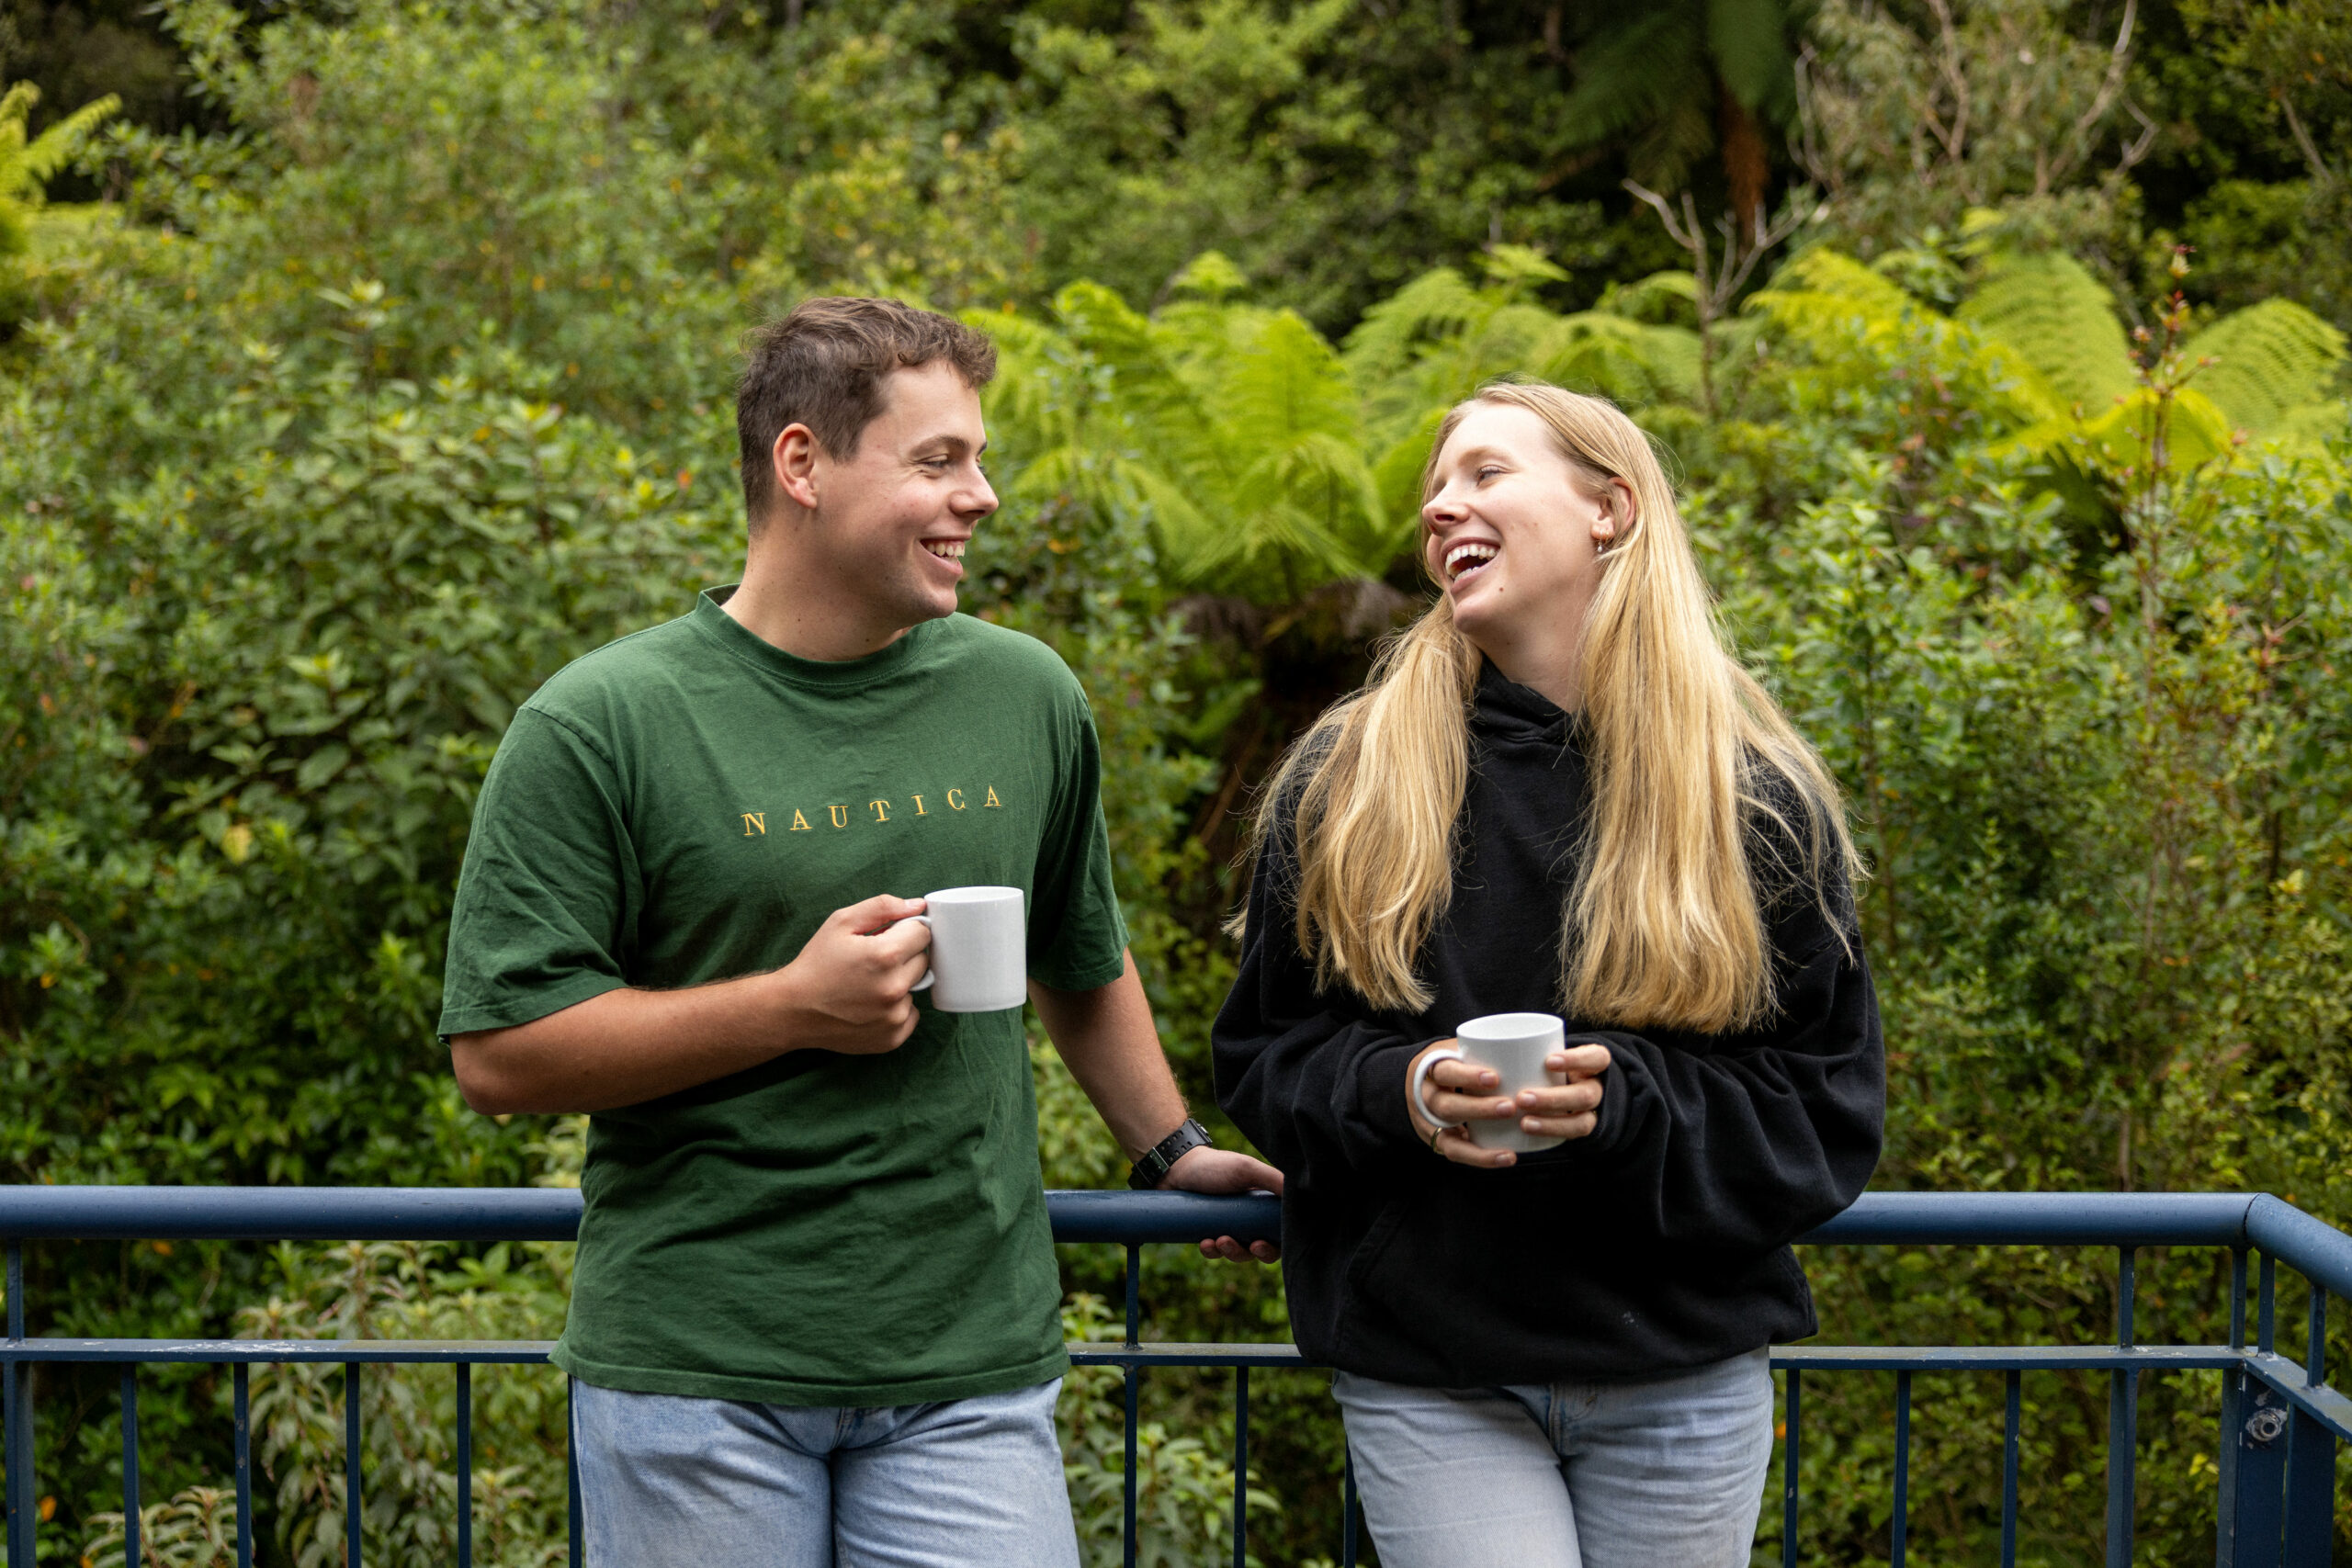 Early Bird Rate 20% Off at Haka House Hostels in New Zealand